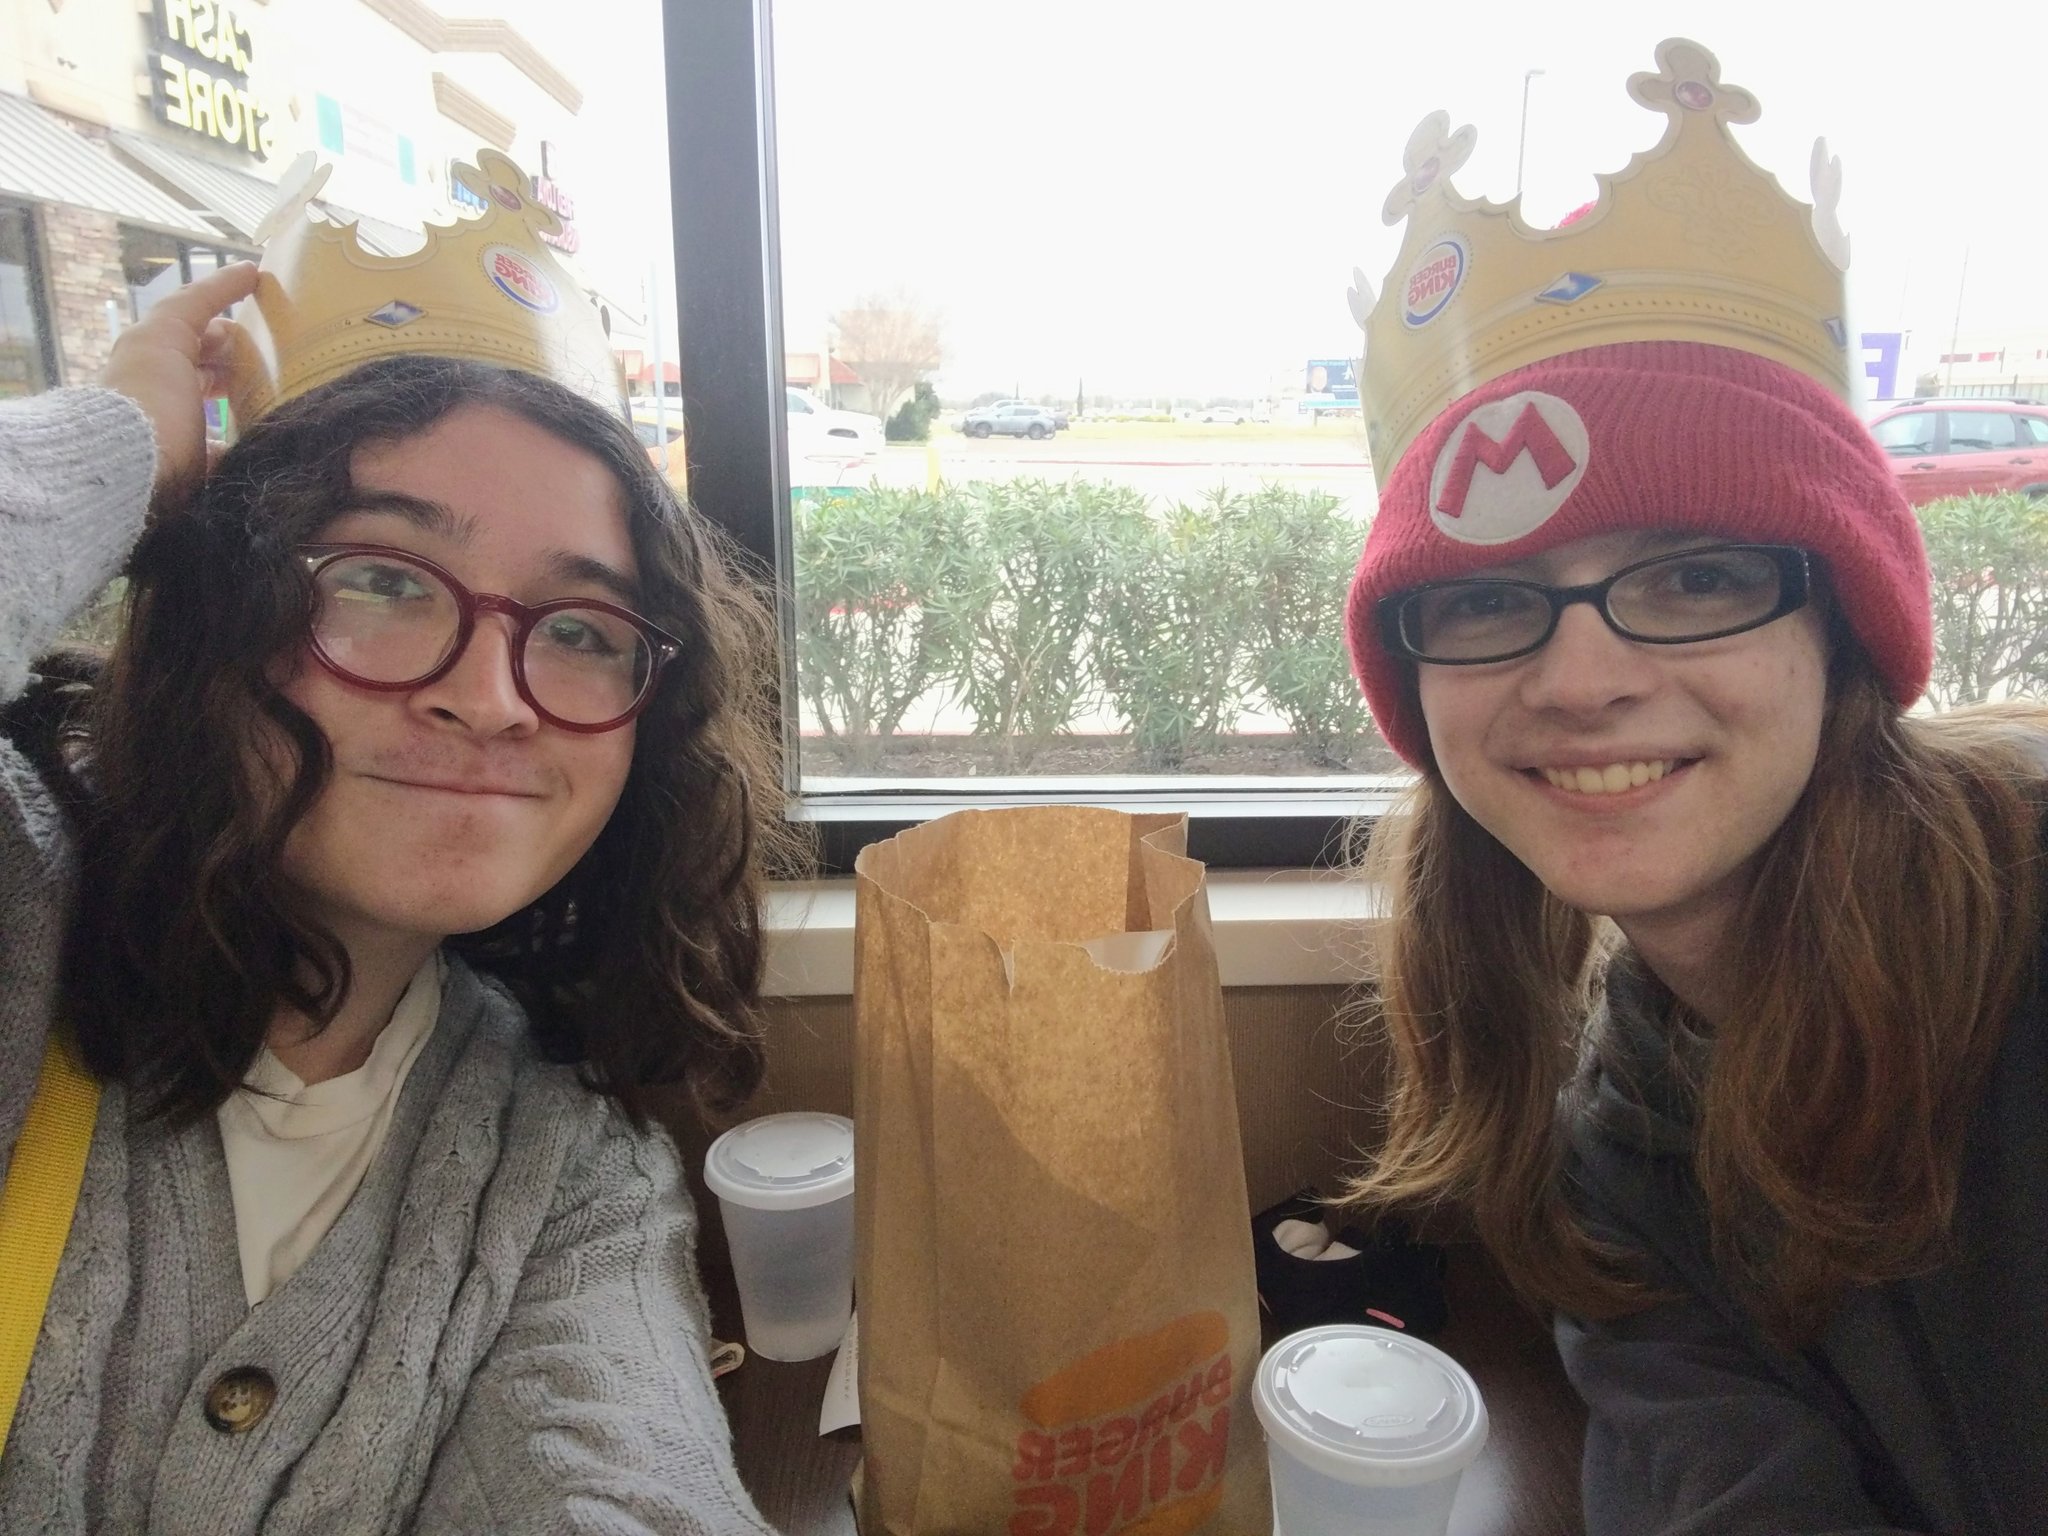 I'm At Burger King With My Burger Queen